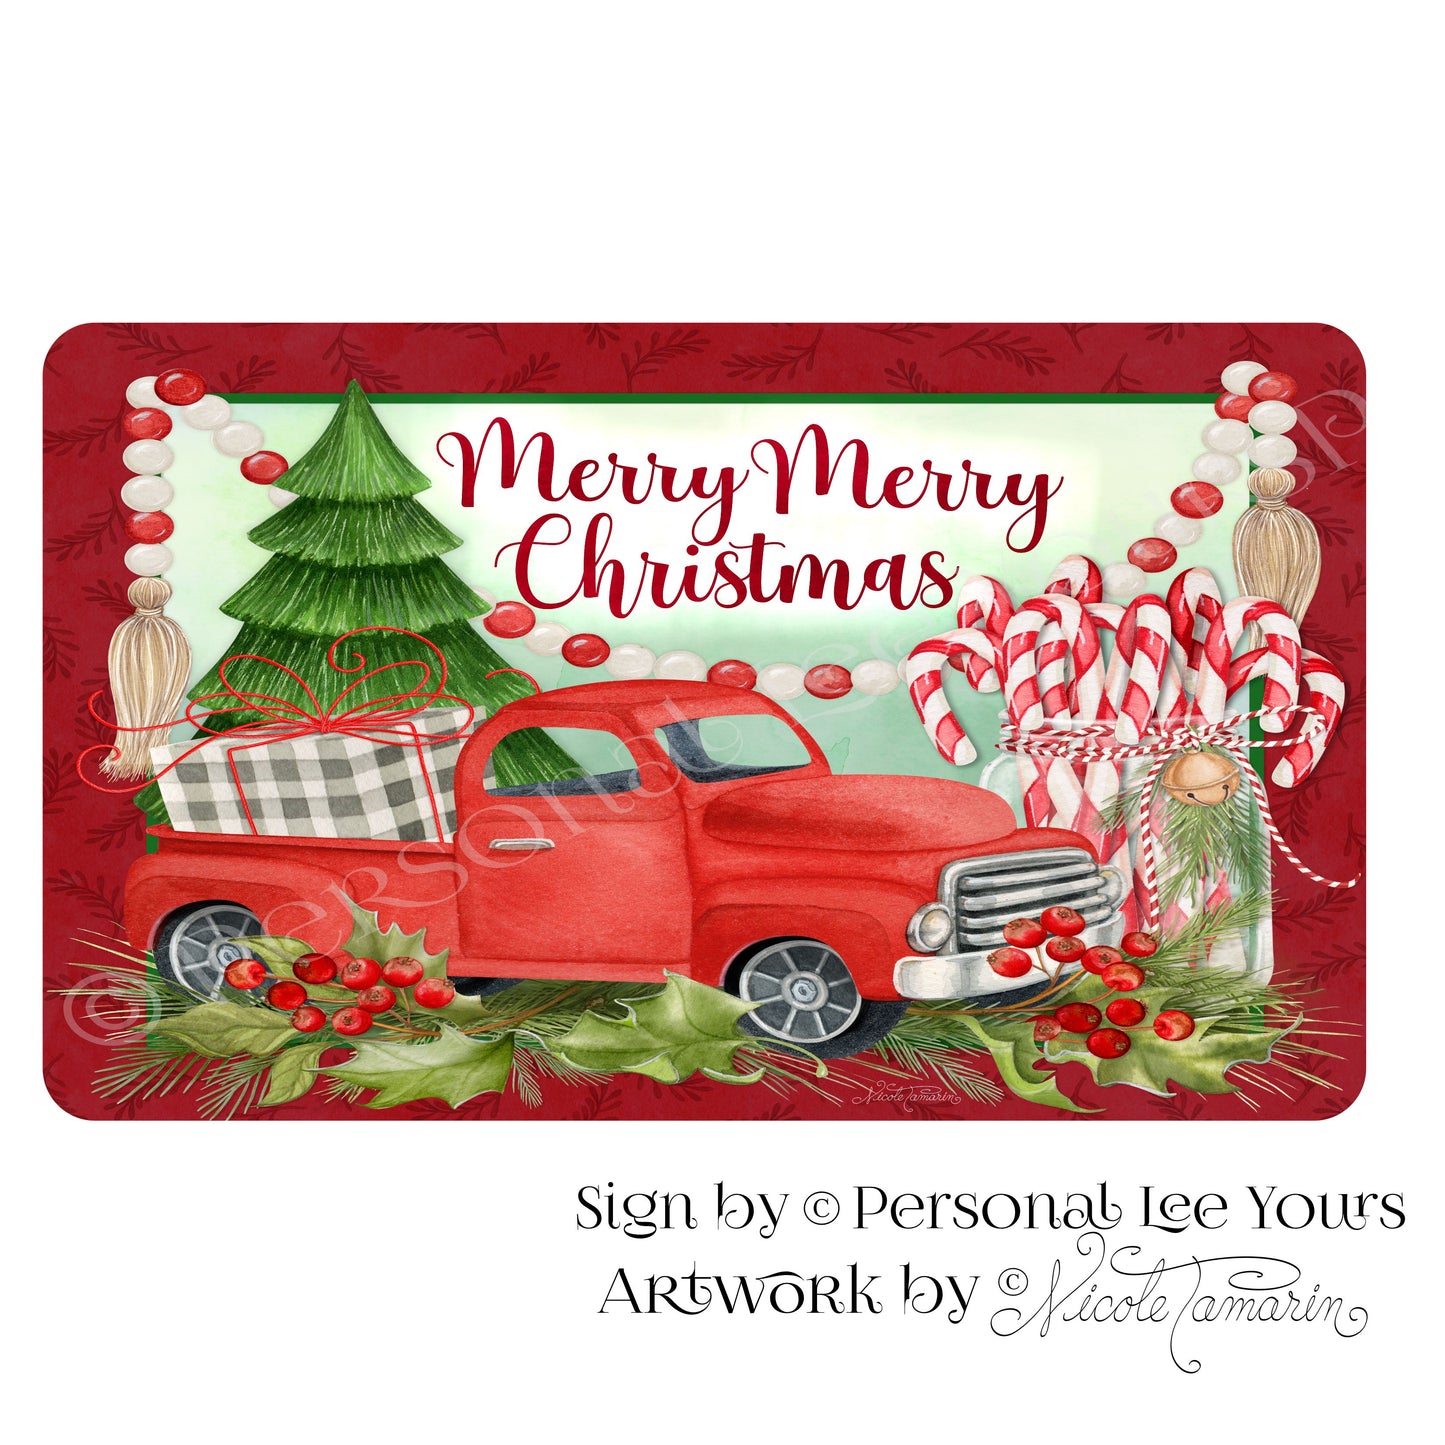 Nicole Tamarin Exclusive Sign * Festive Holiday * Merry Merry Christmas * 4 Sizes * Lightweight Metal